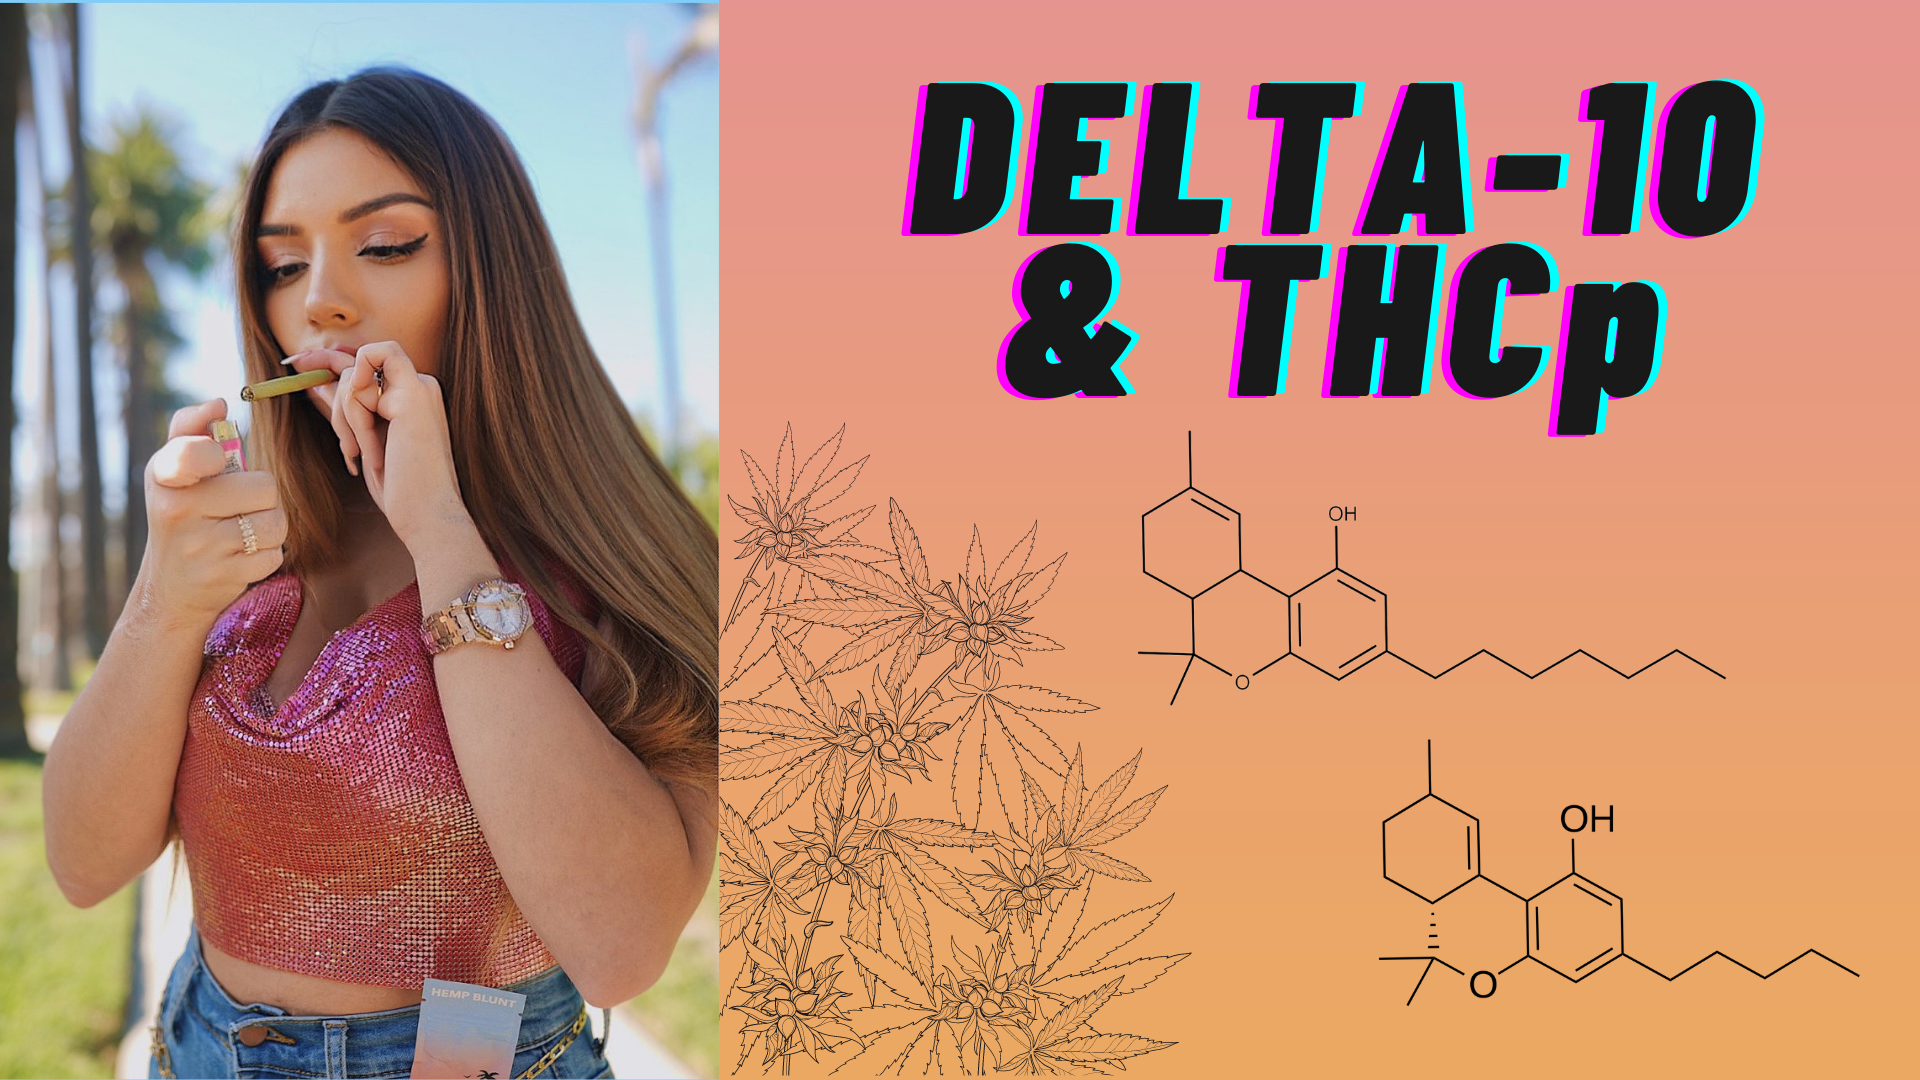 Want to try hot, new cannabinoids like delta-10 & THCP? It pays to